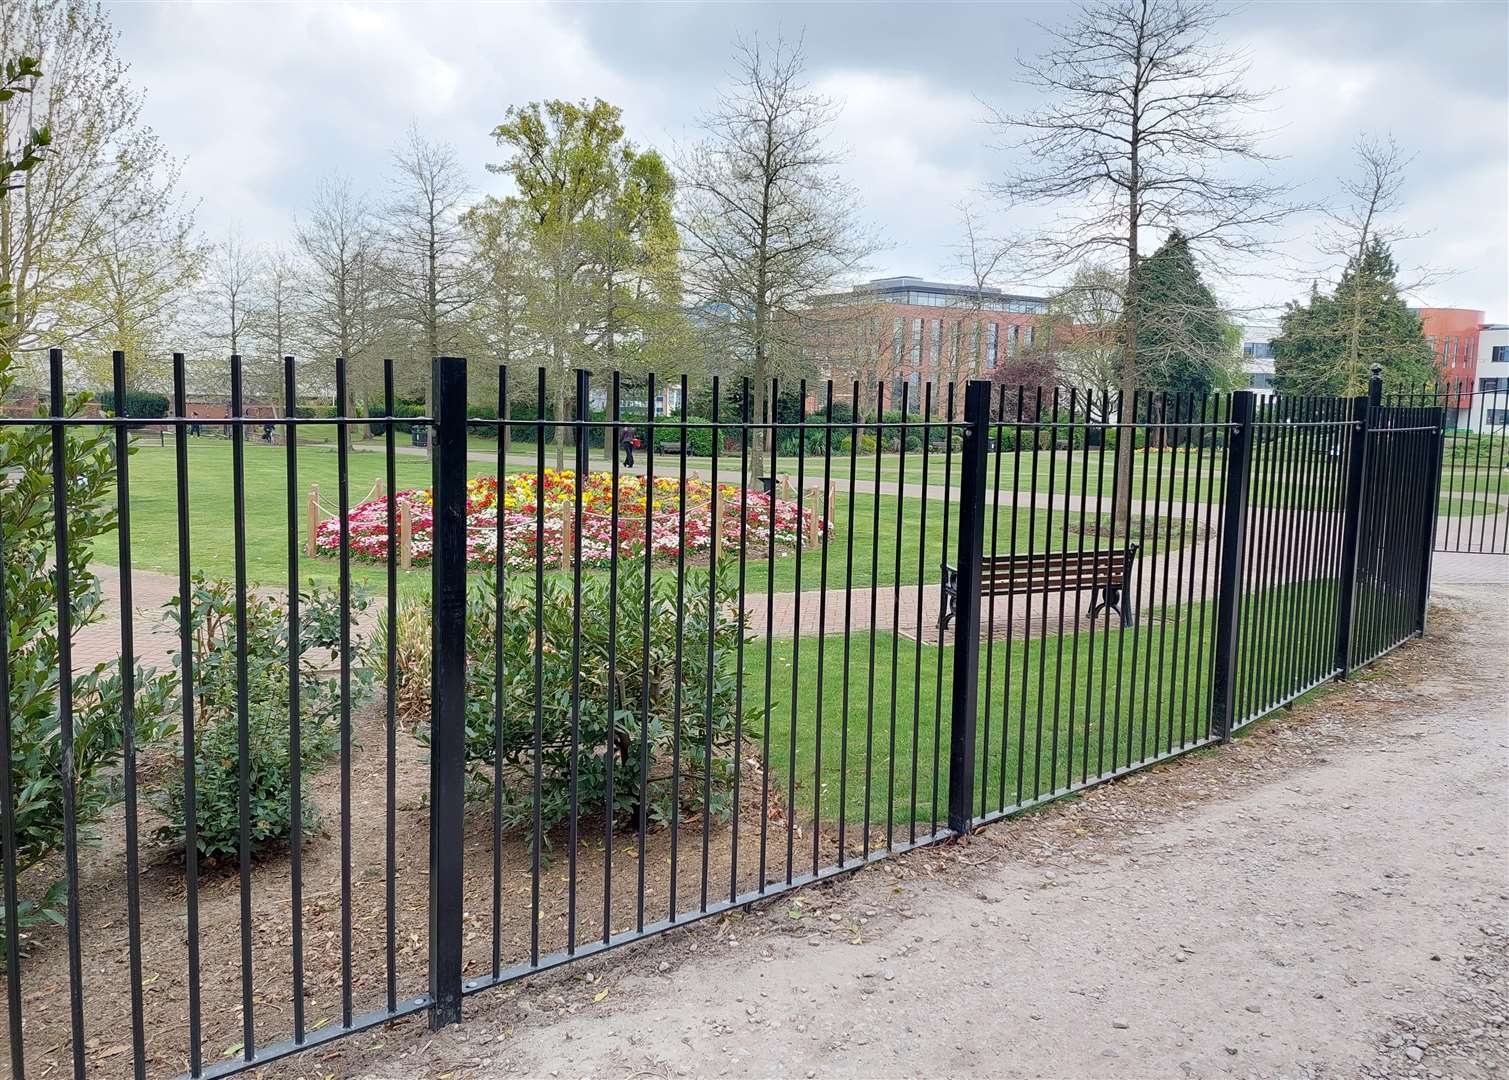 Improvements to the Memorial Gardens to remove undergrowth and replace the perimeter fence have also been carried out